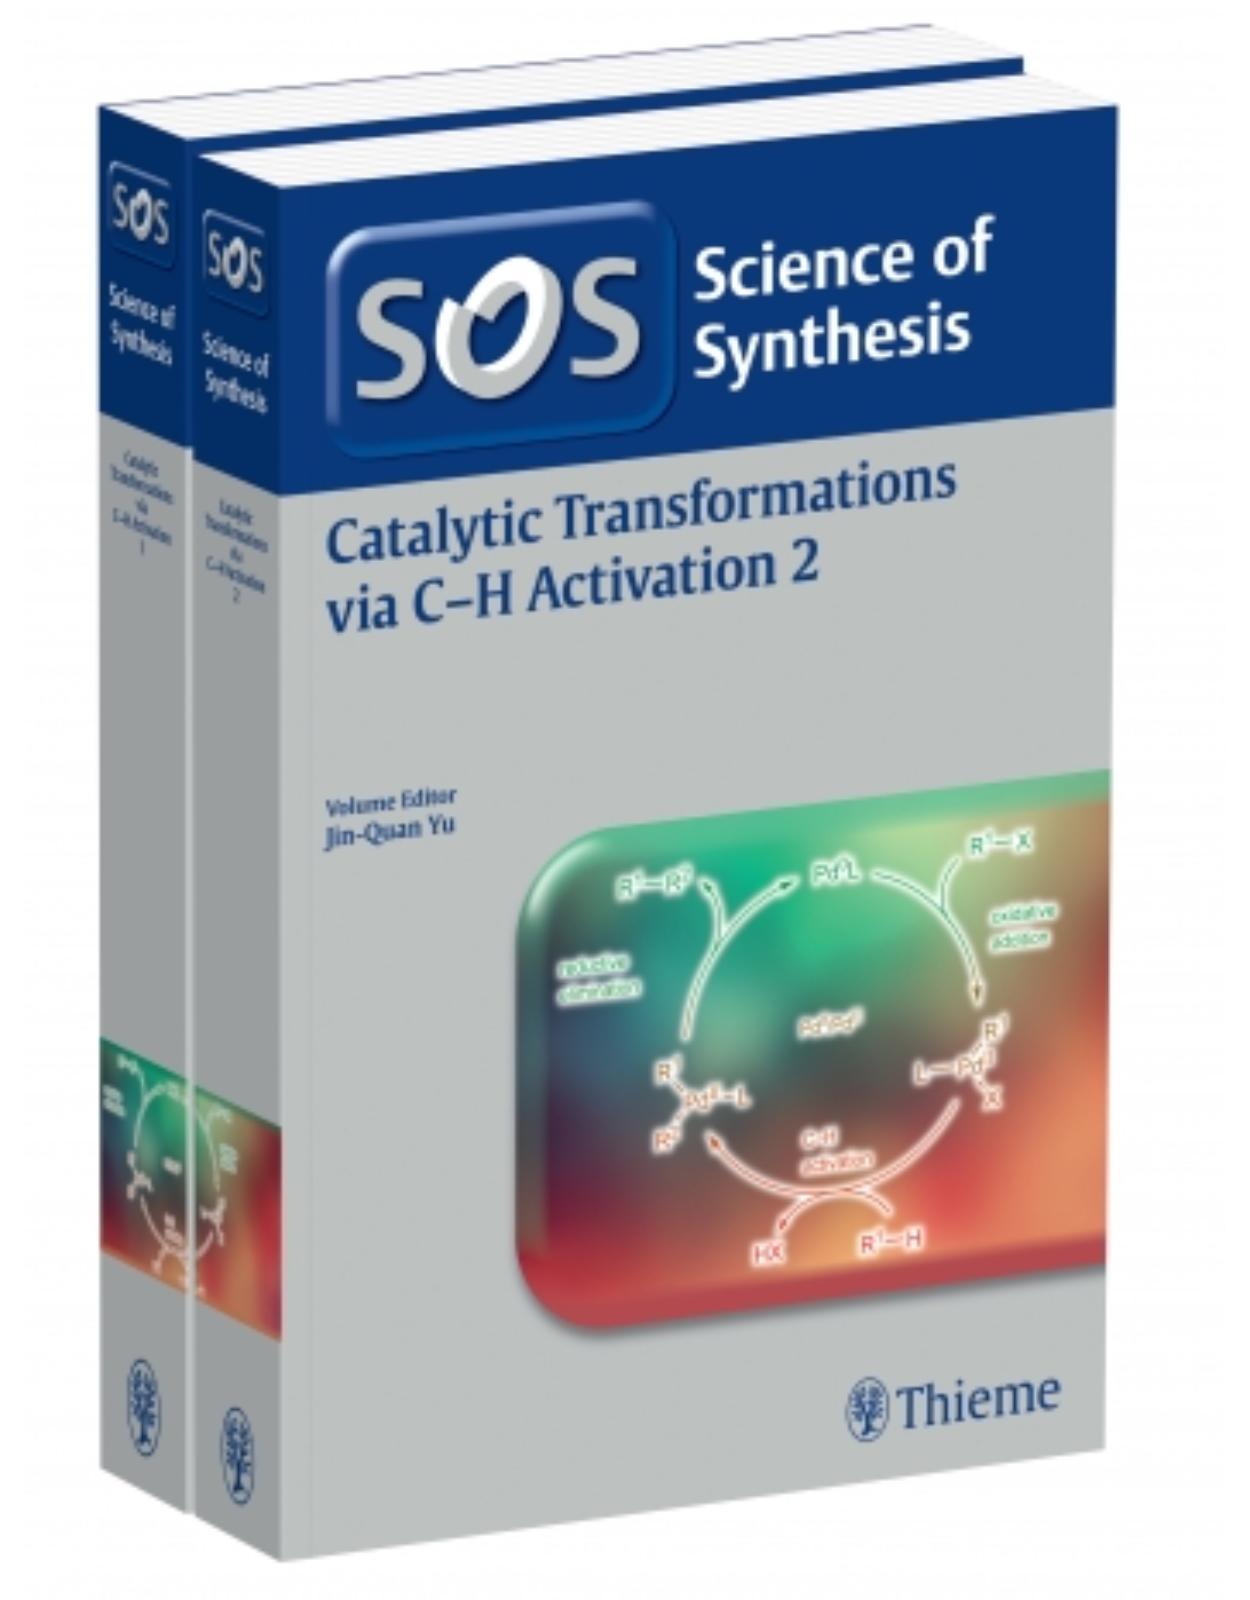  Catalytic Transformations via C-H Activation, Workbench Edition